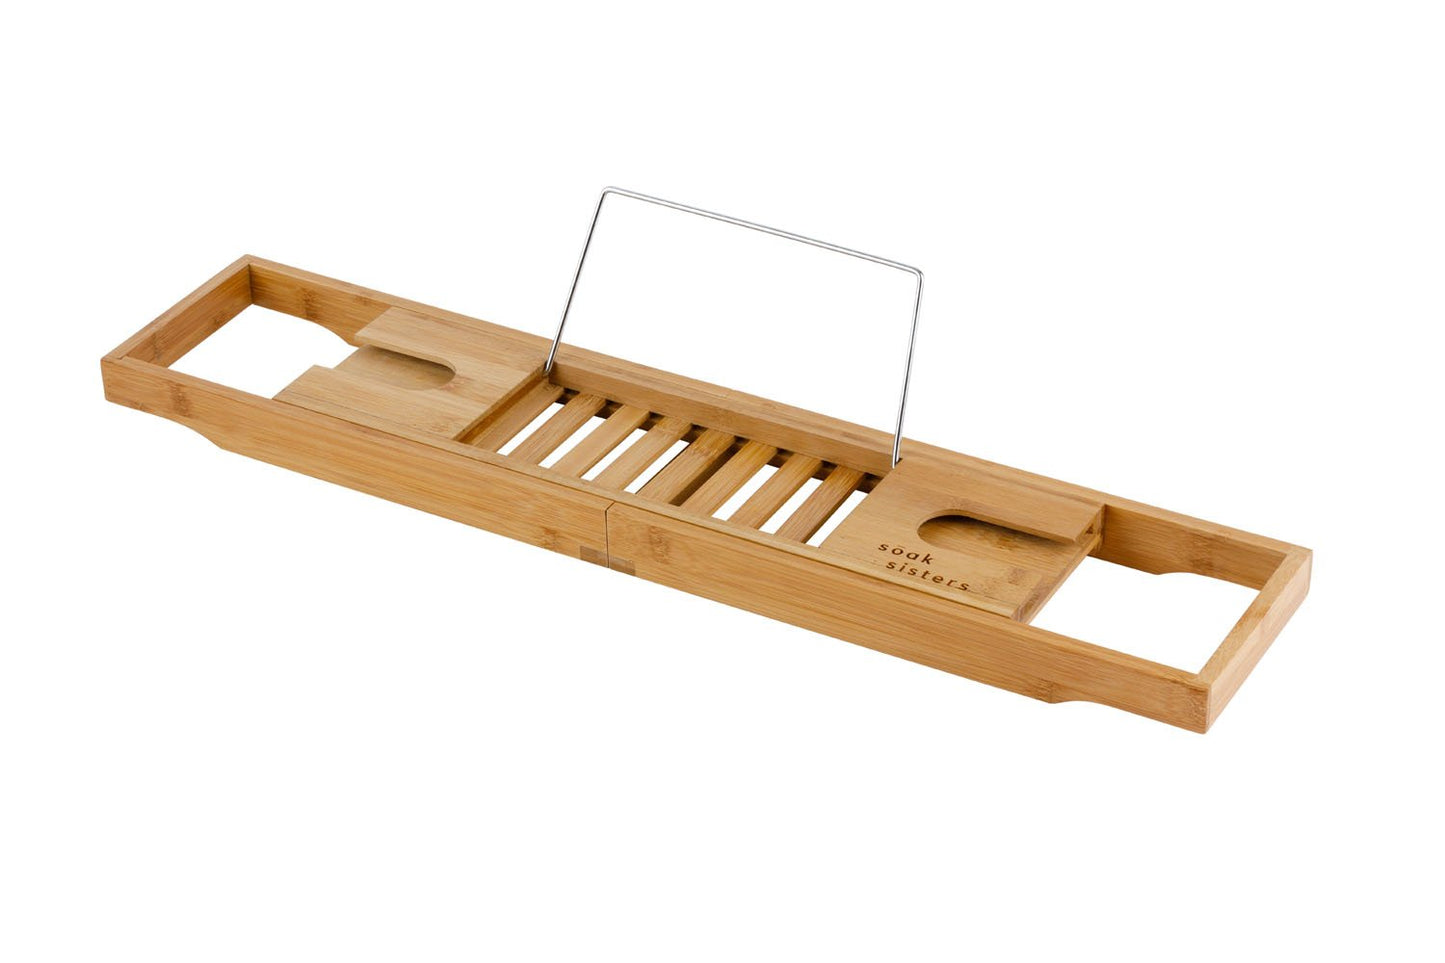 Diagonal view of bamboo bath caddy with metal stand opened out